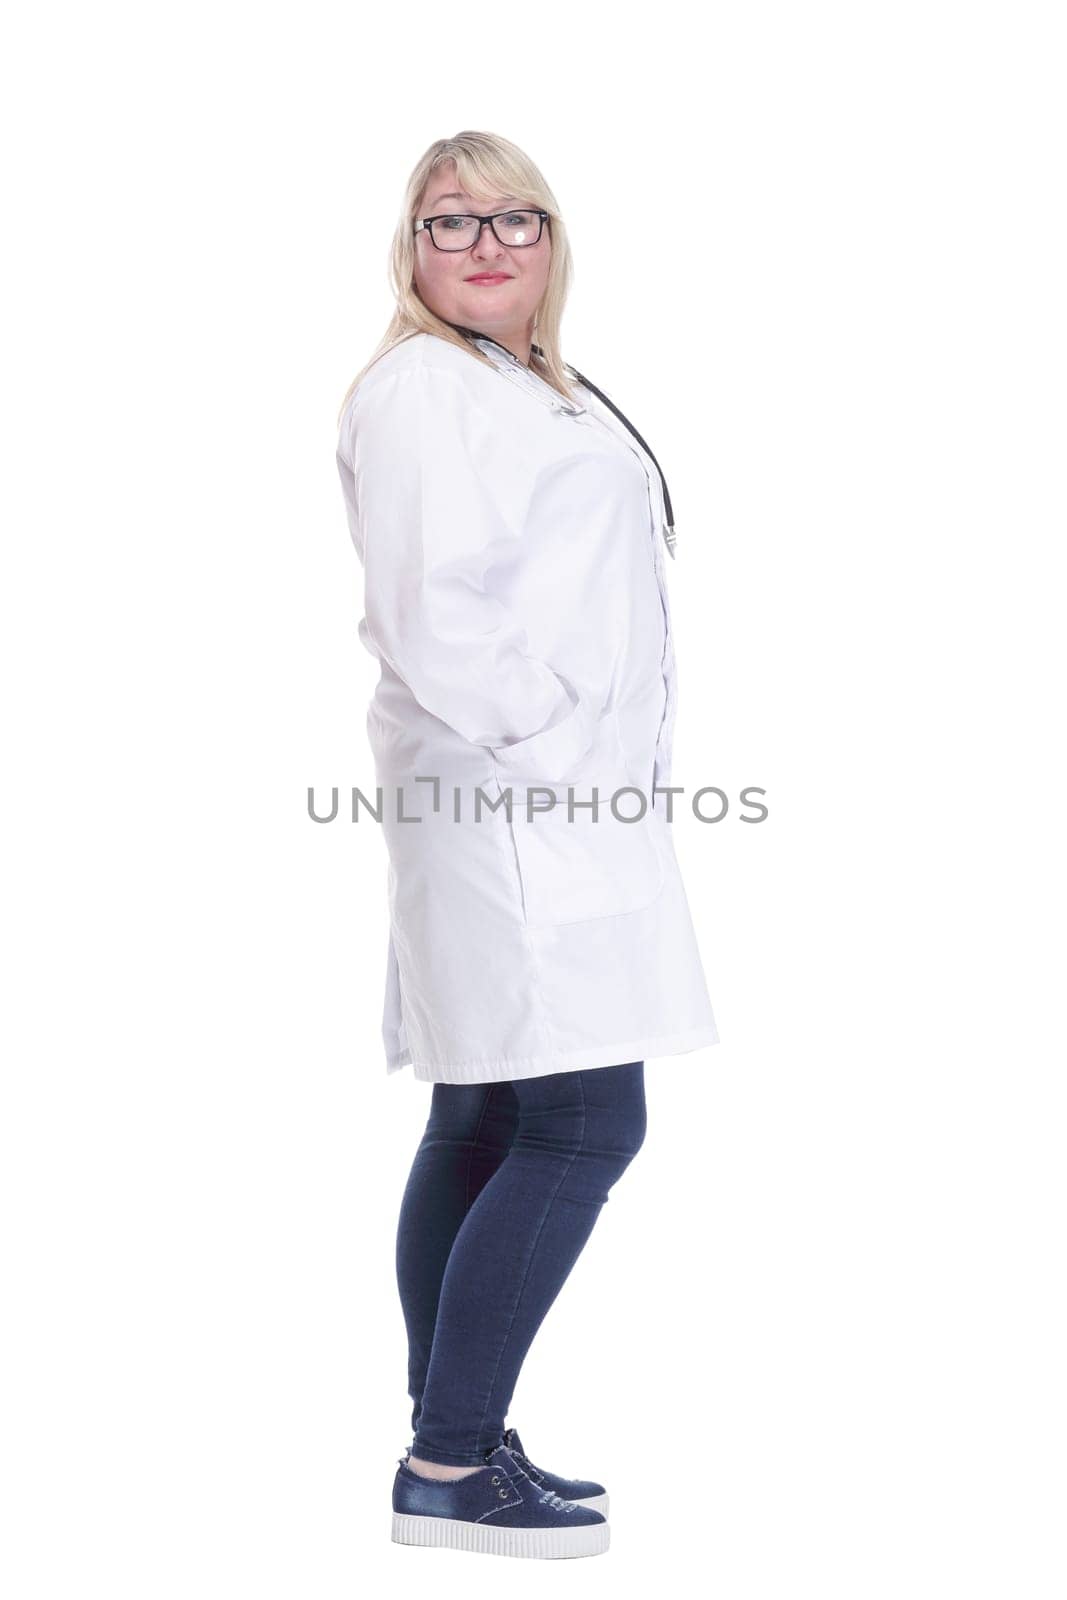 in full growth. smiling female doctor with a stethoscope. isolated on a white background.